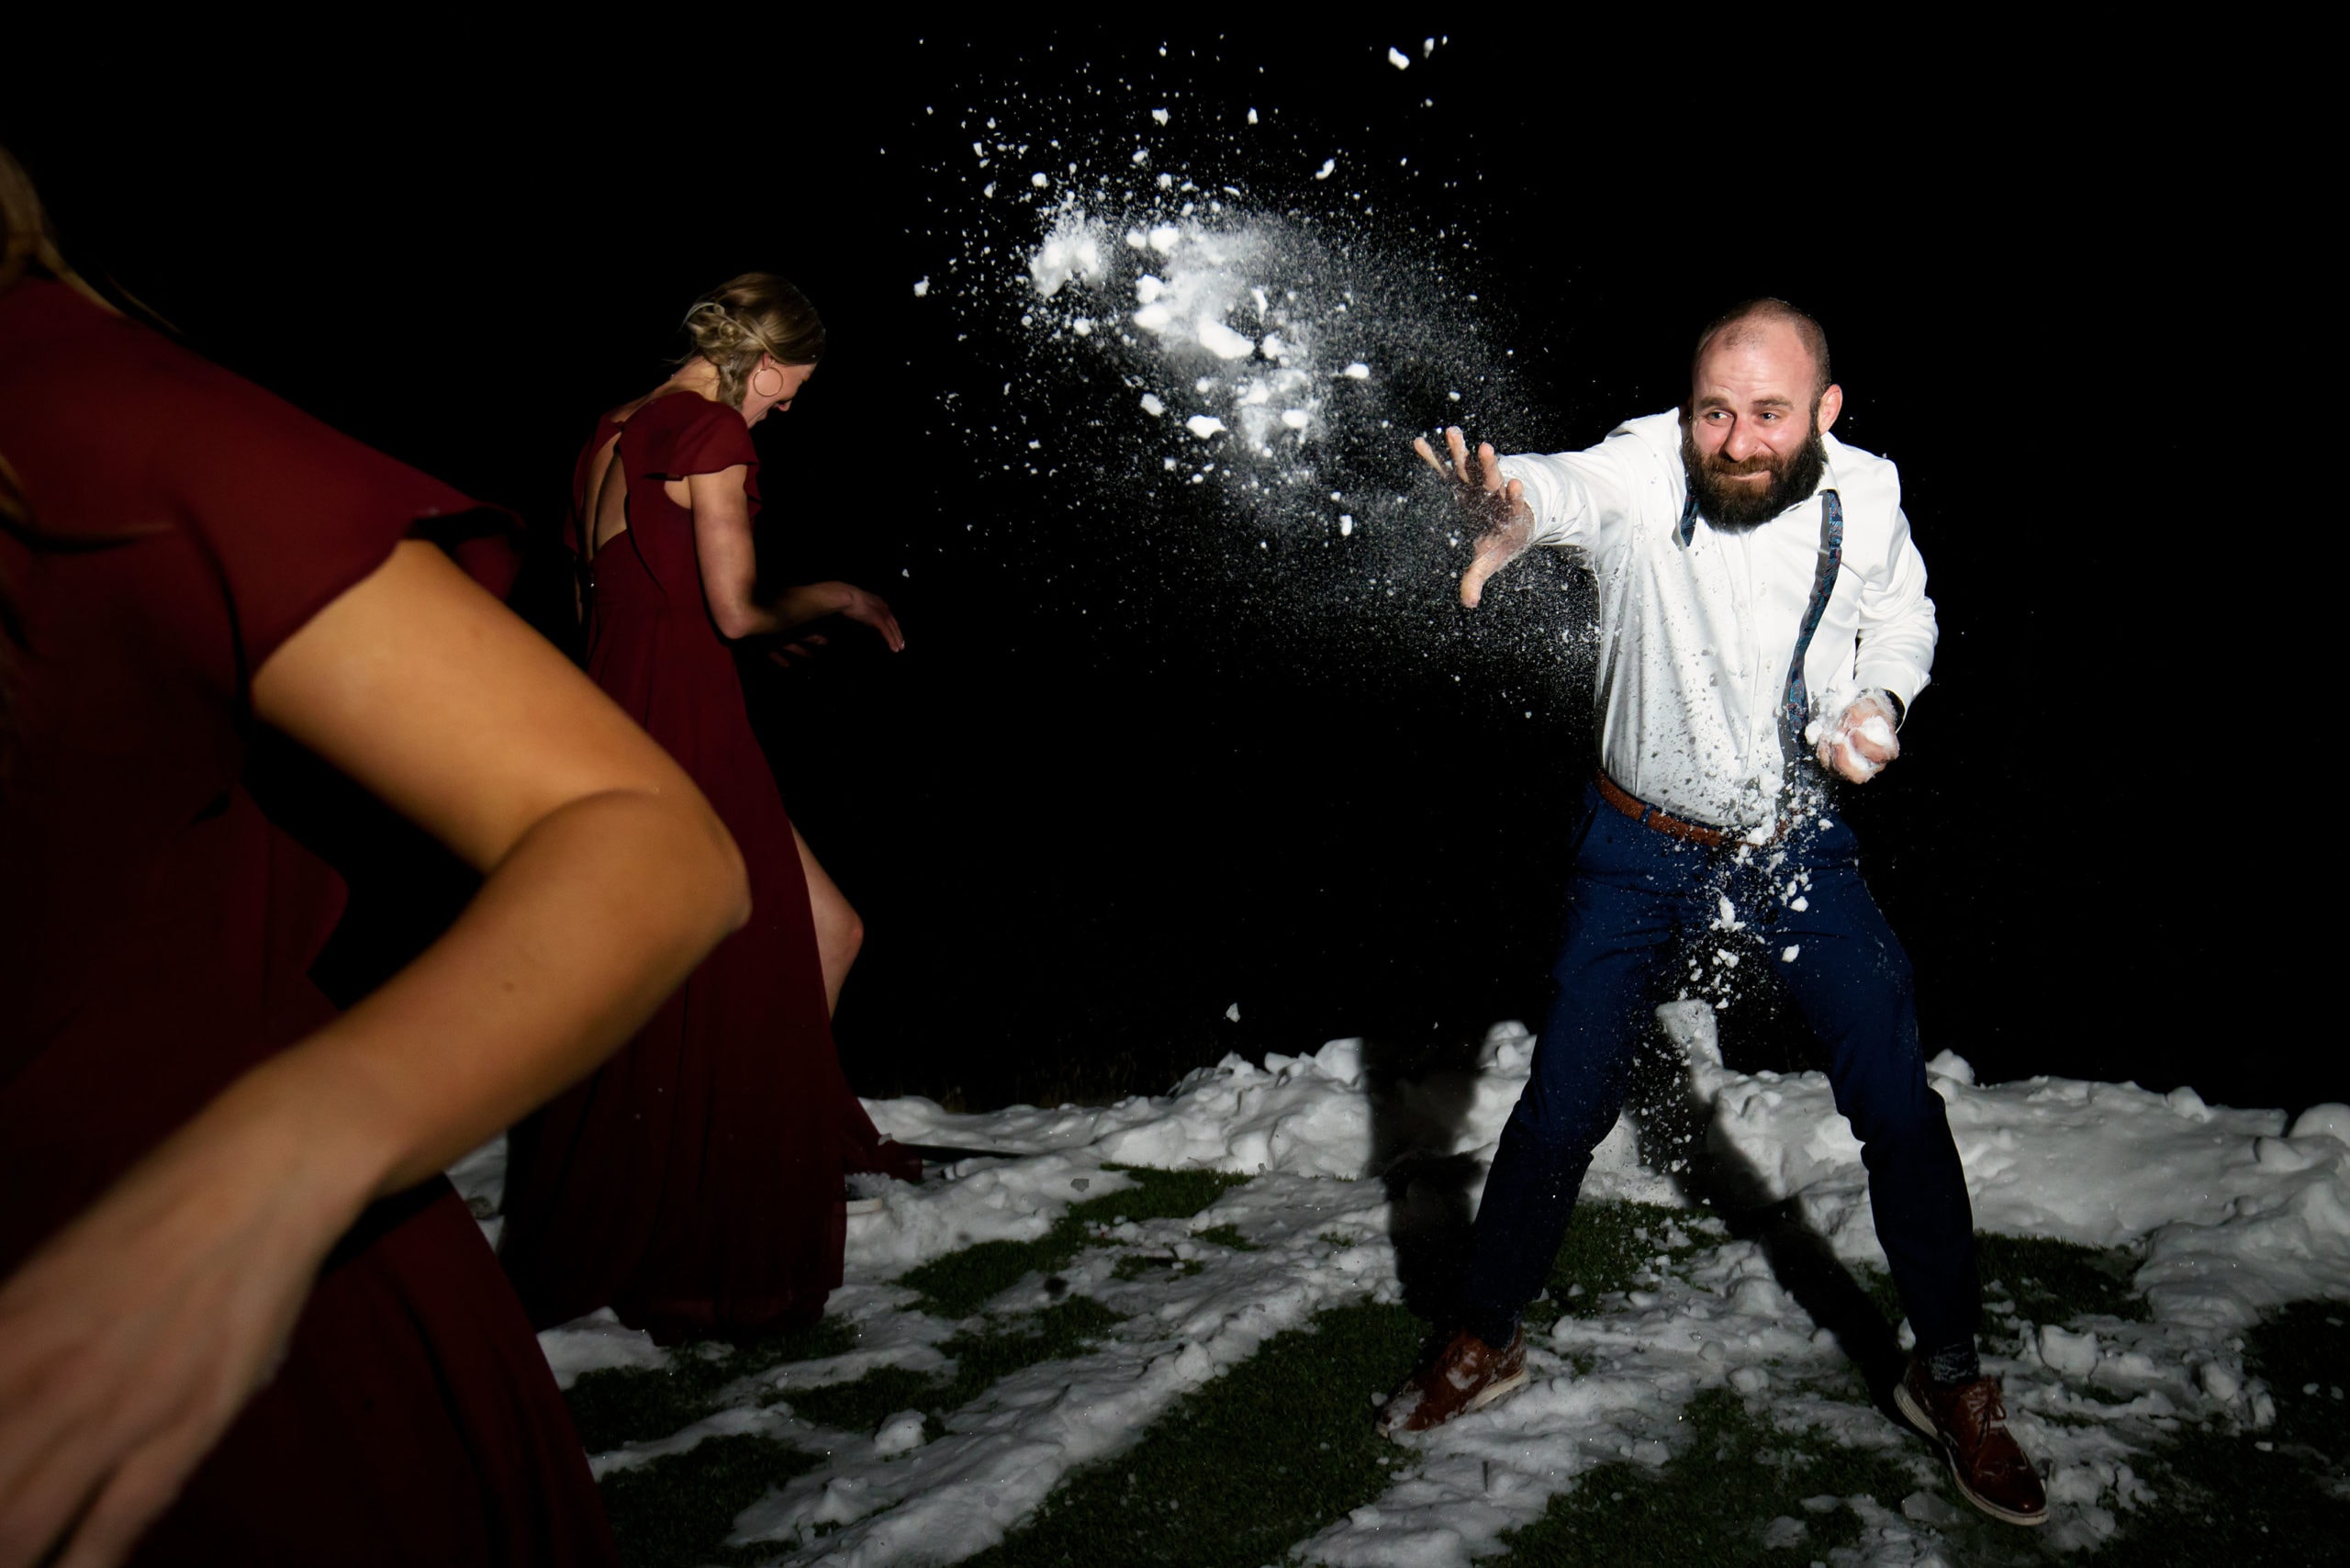 Wedding guests have a snowball fight at Woodlands during the wedding reception